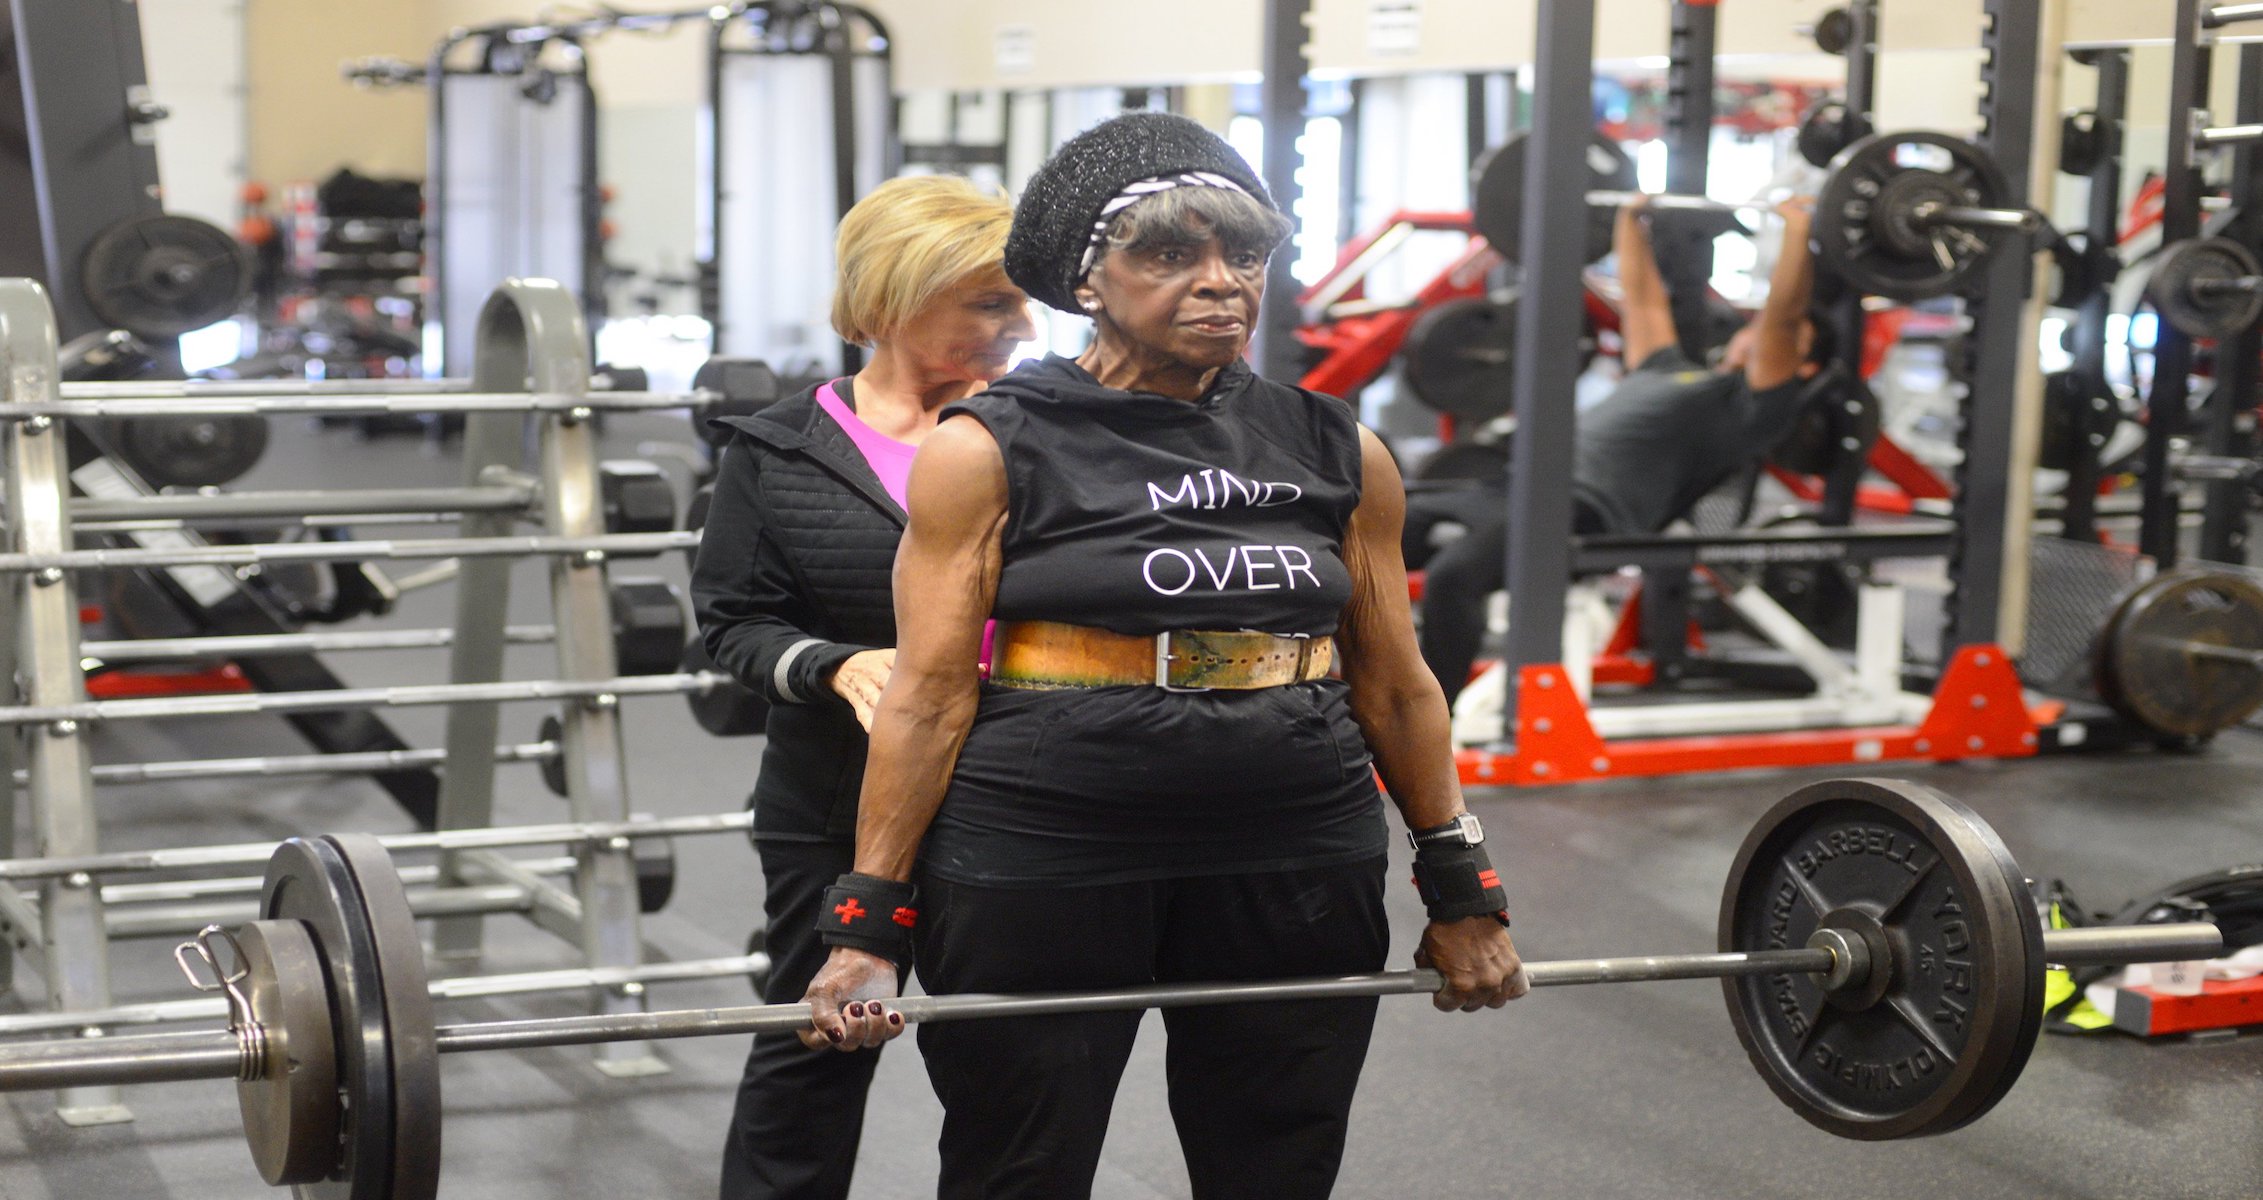 WATCH: 84-Year-Old Carrie Reese Shows Strength With 195lb Deadlift